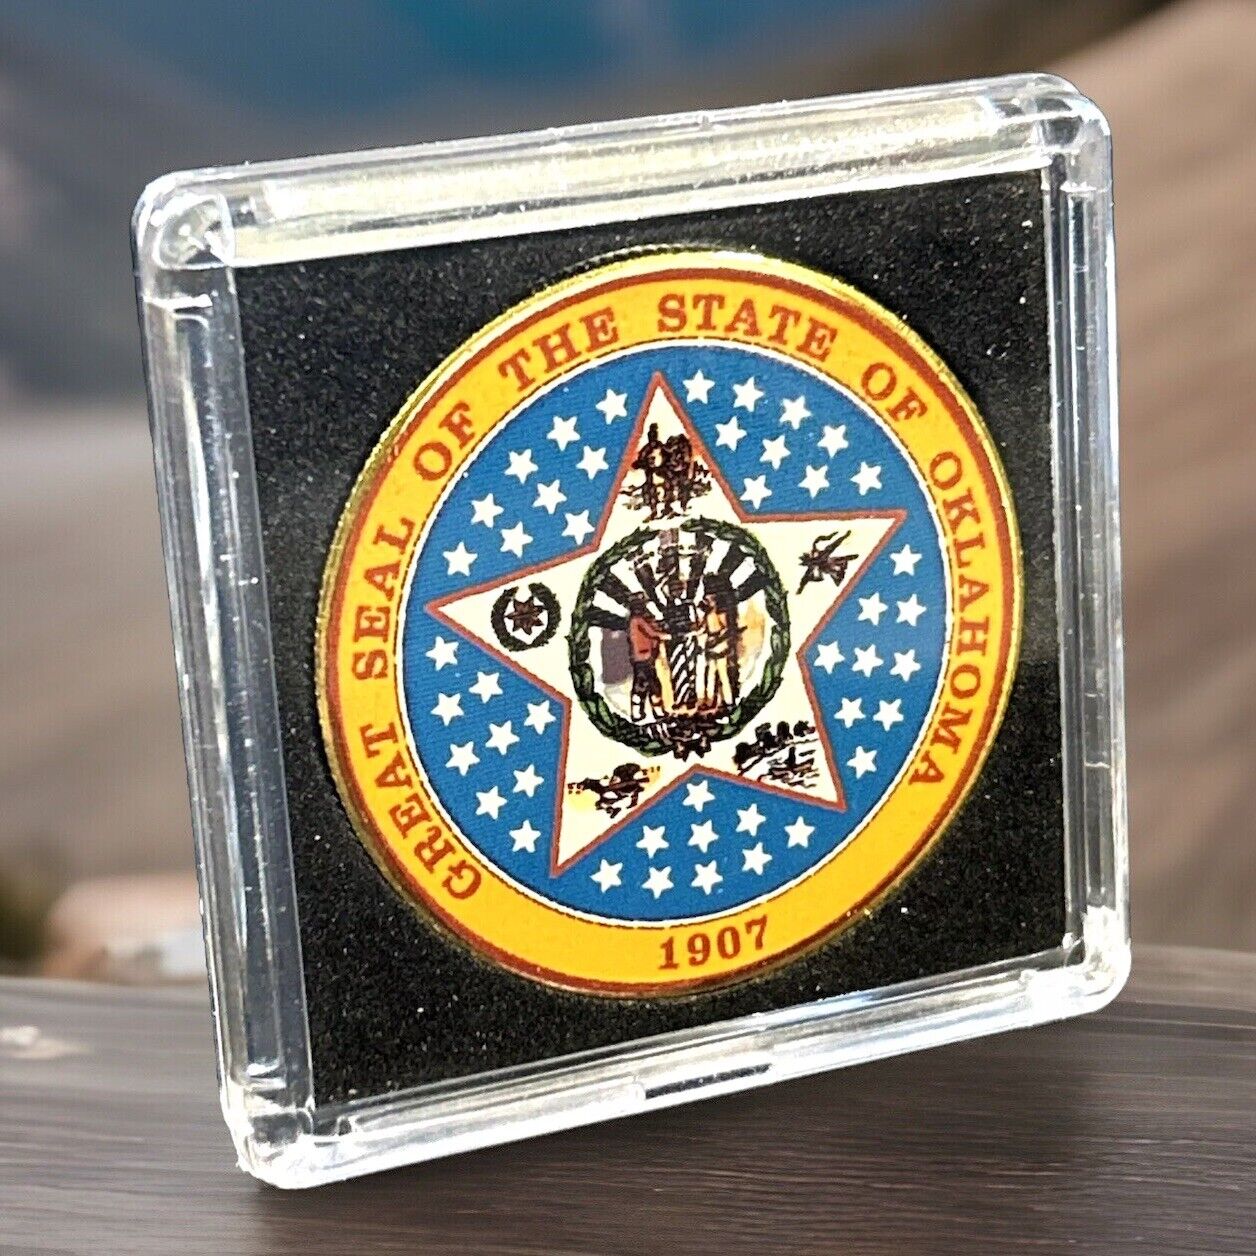 OKLAHOMA (OK) State Seal 1907 Colorized Collectible Challenge Coin WITH CASE